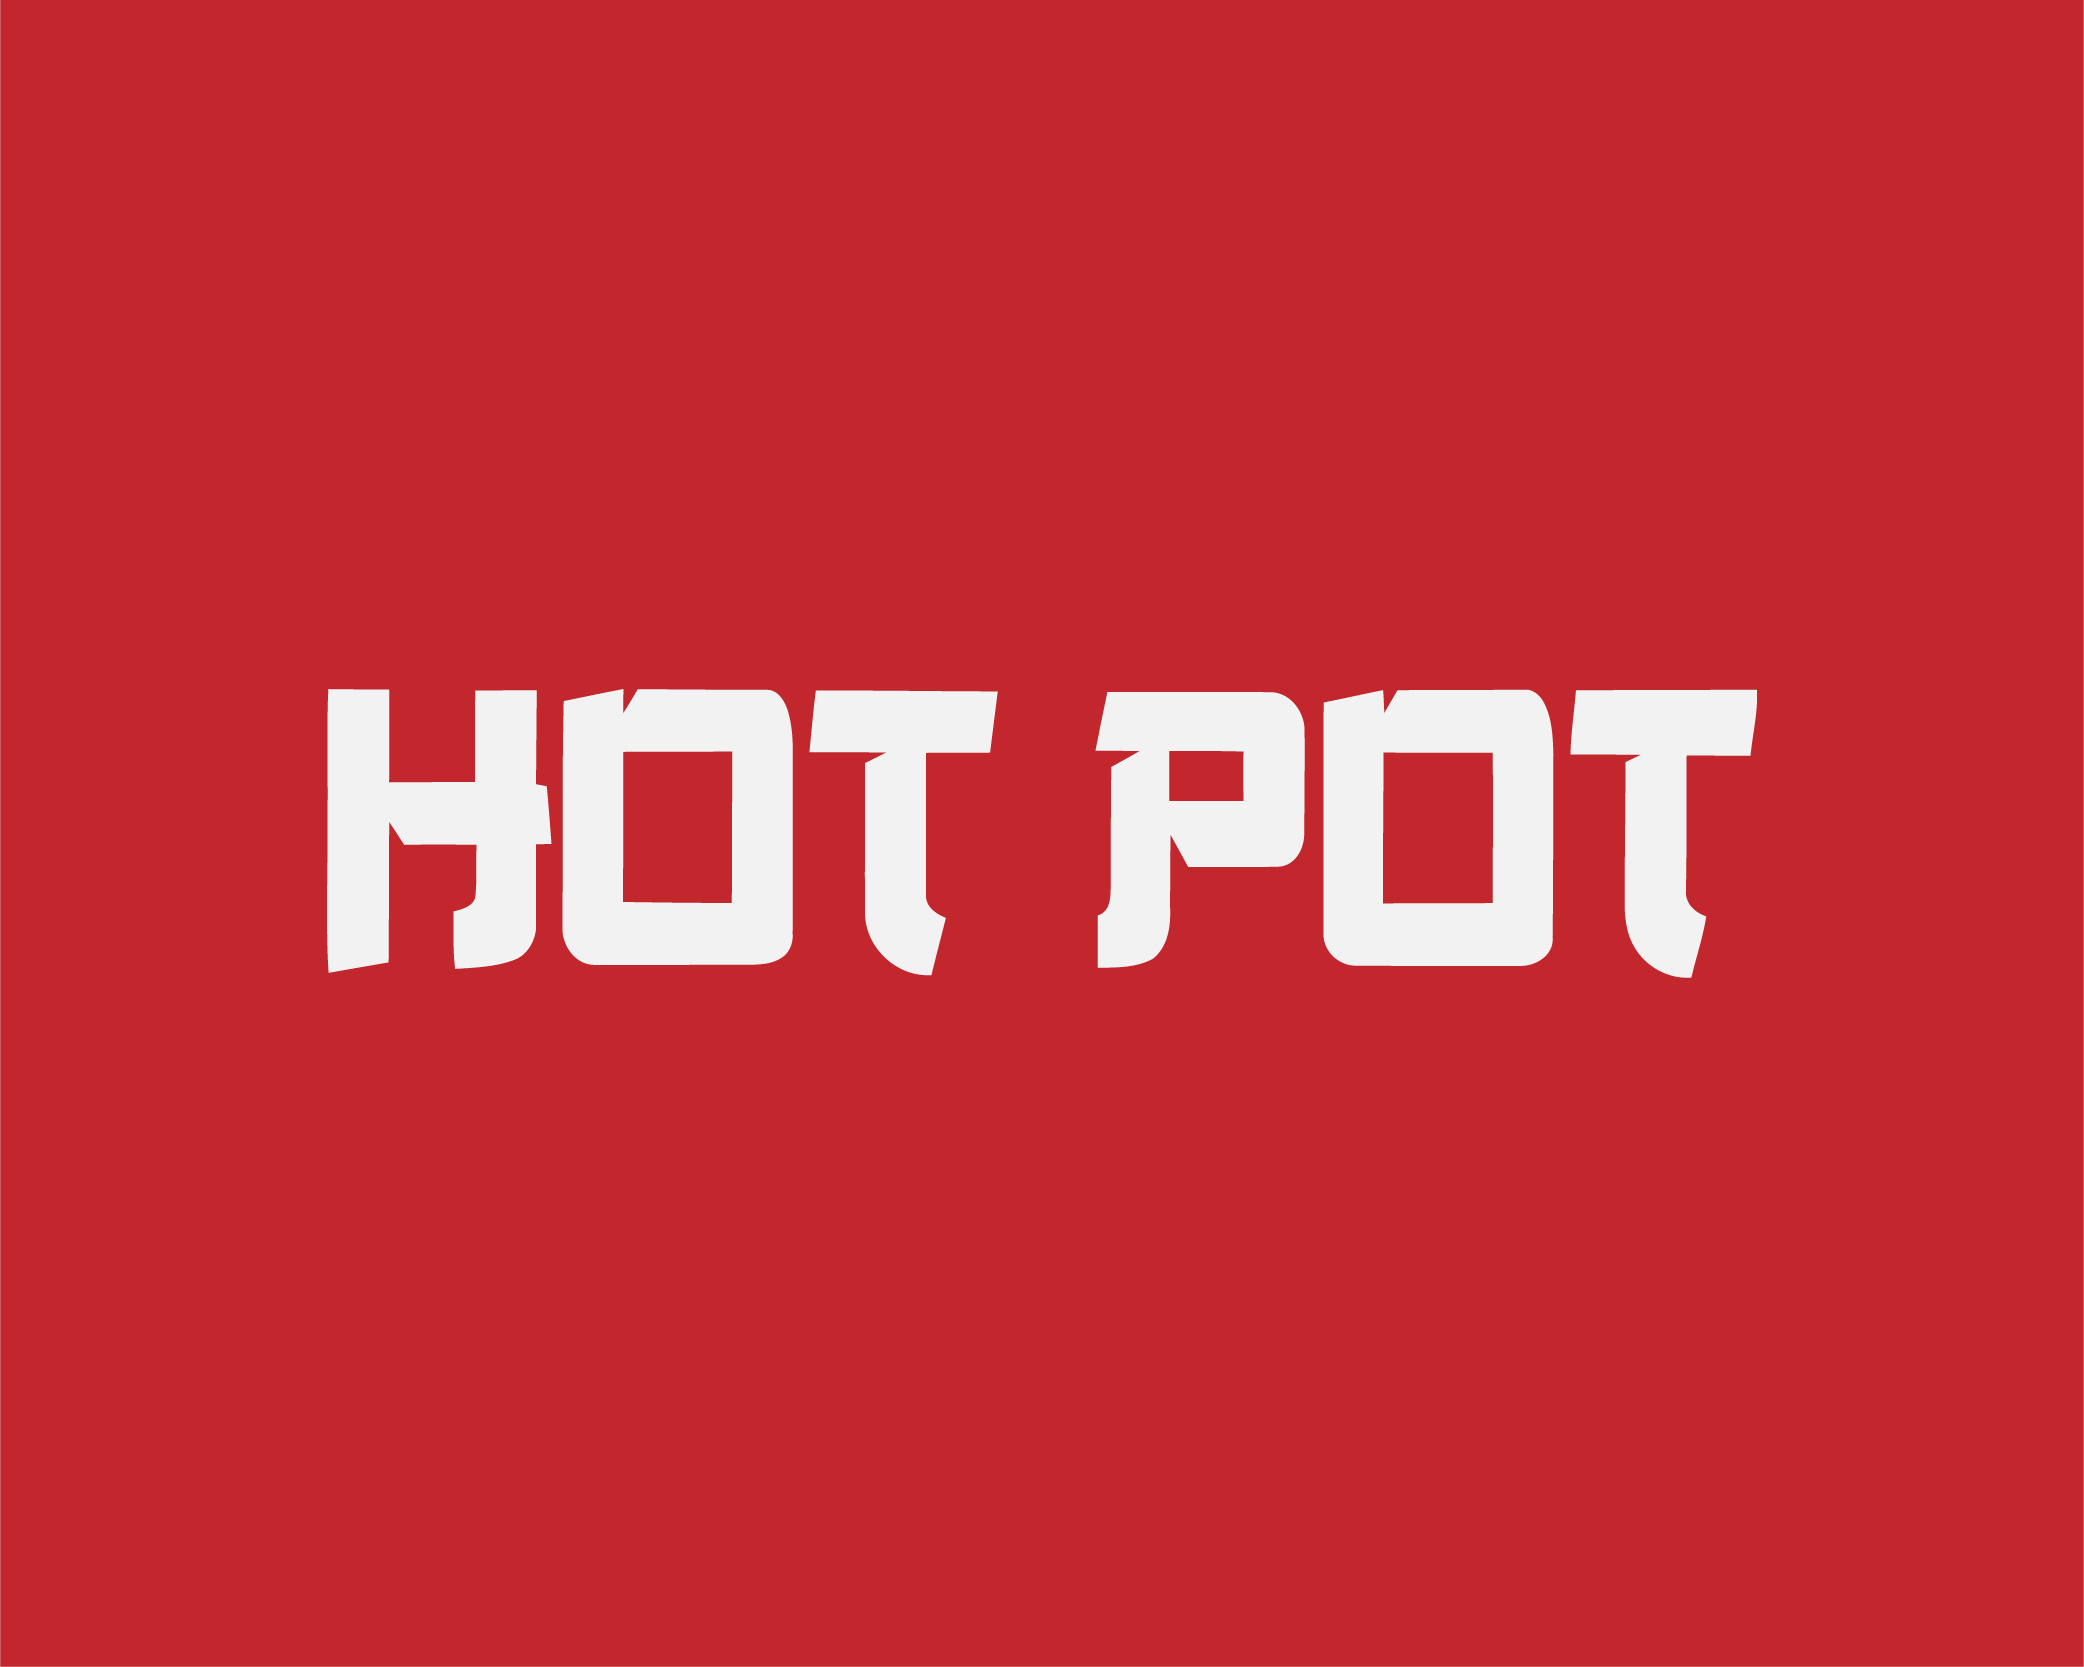 Red and White Circle Restaurant Logo - Hot Pot Restaurants: Hot Pot London | Authentic Hot Pot in Chinatown ...